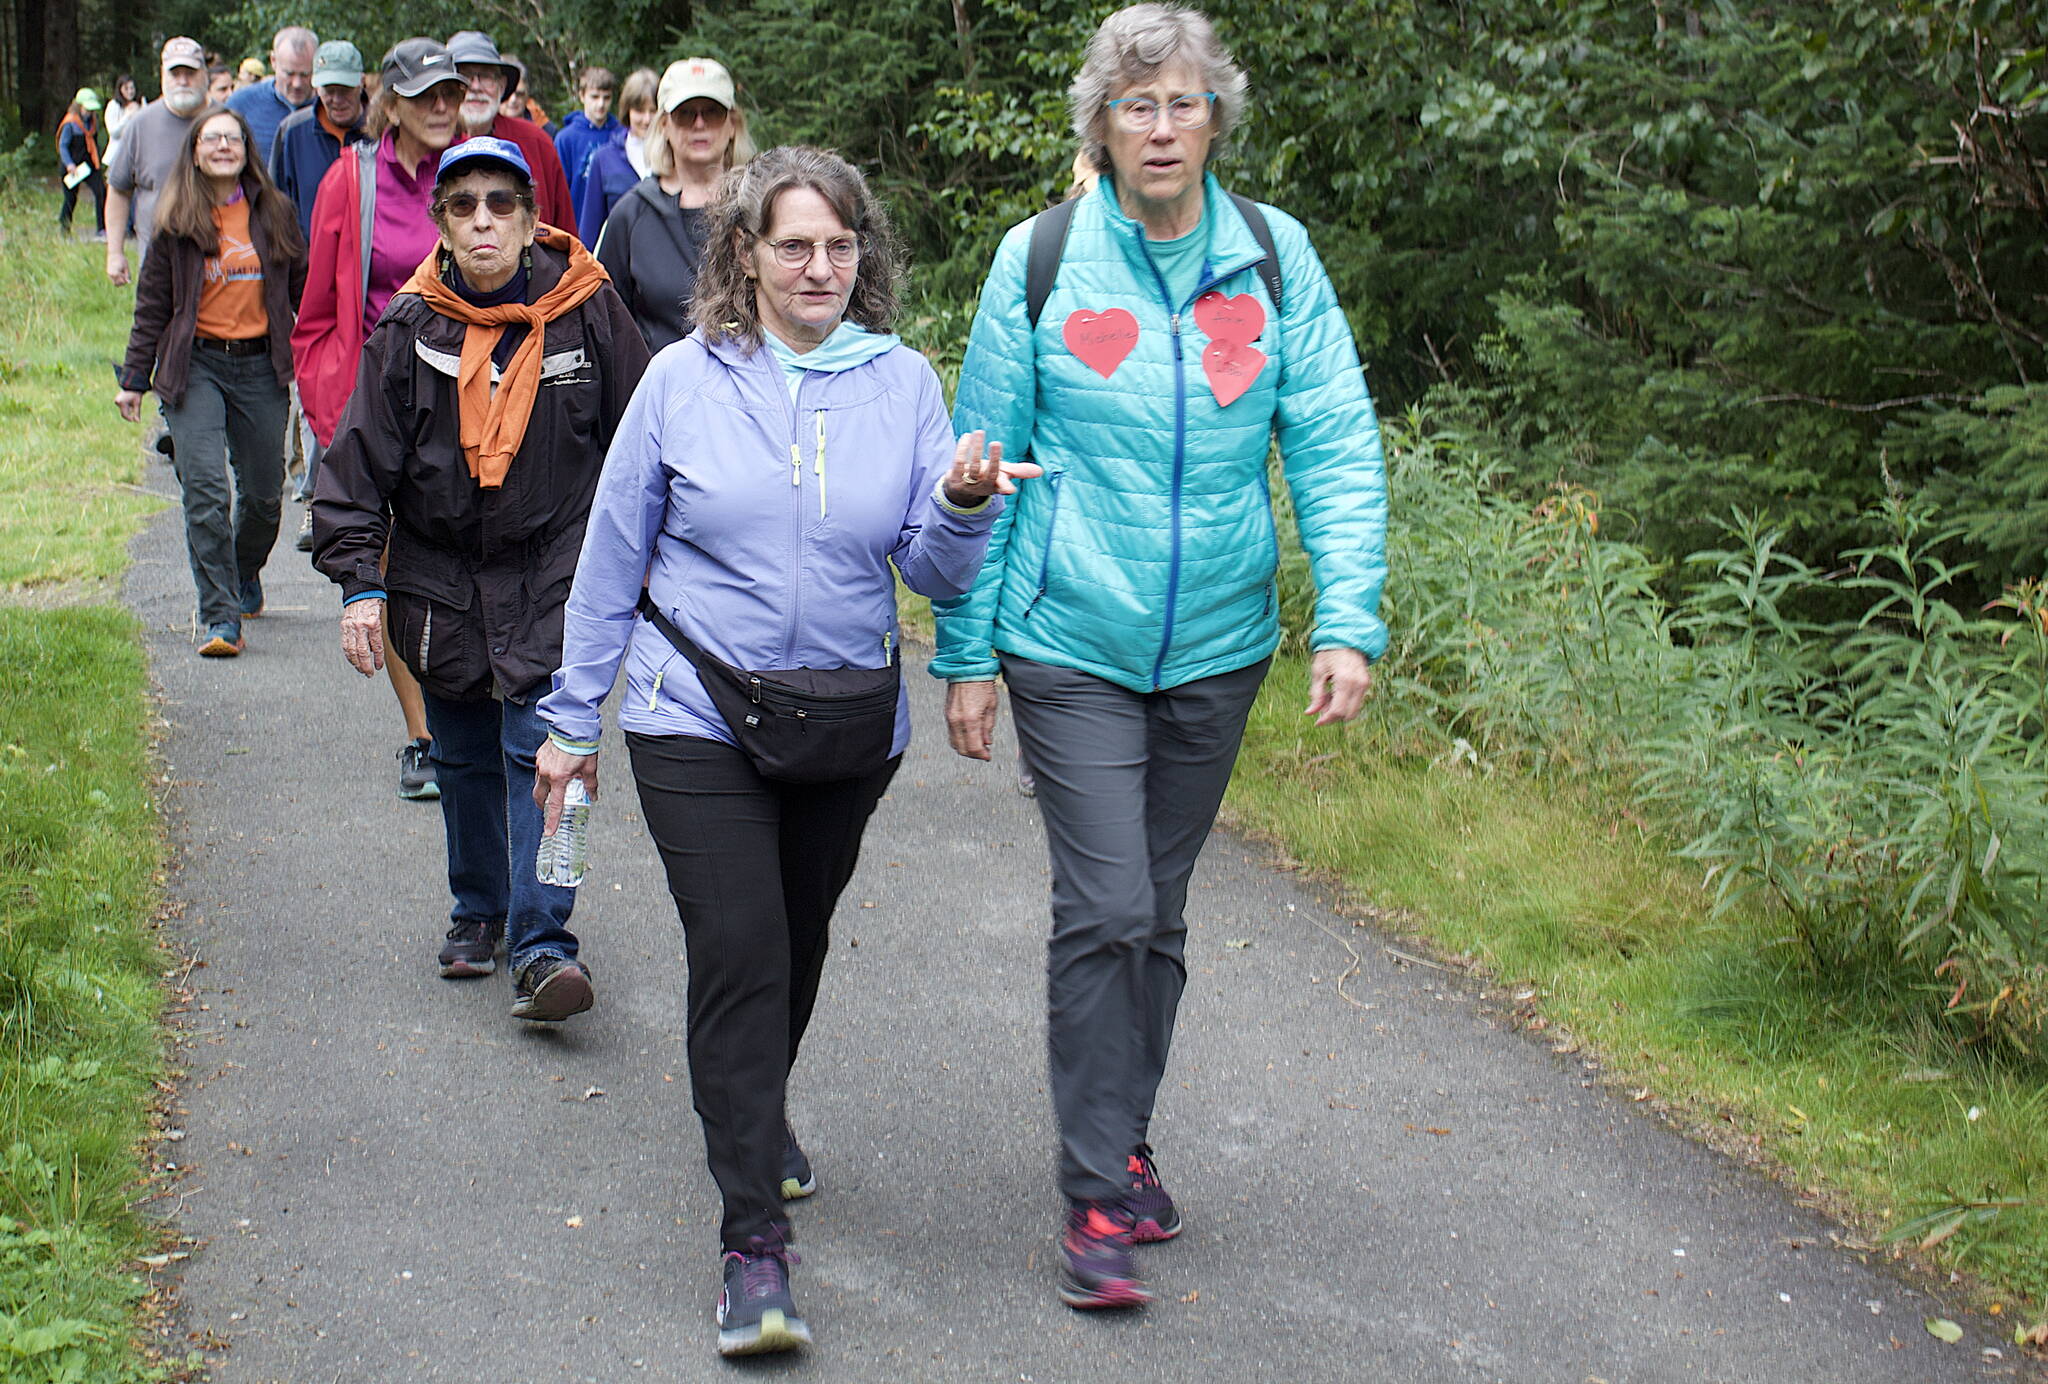 Participants walk the two-mile course, much of it on trails through the woods, during the 32nd Annual Beat the Odds: A Race Against Cancer on Saturday. Many participants wore paper hearts with names signifying loved ones affected by the disease. (Mark Sabbatini / Juneau Empire)